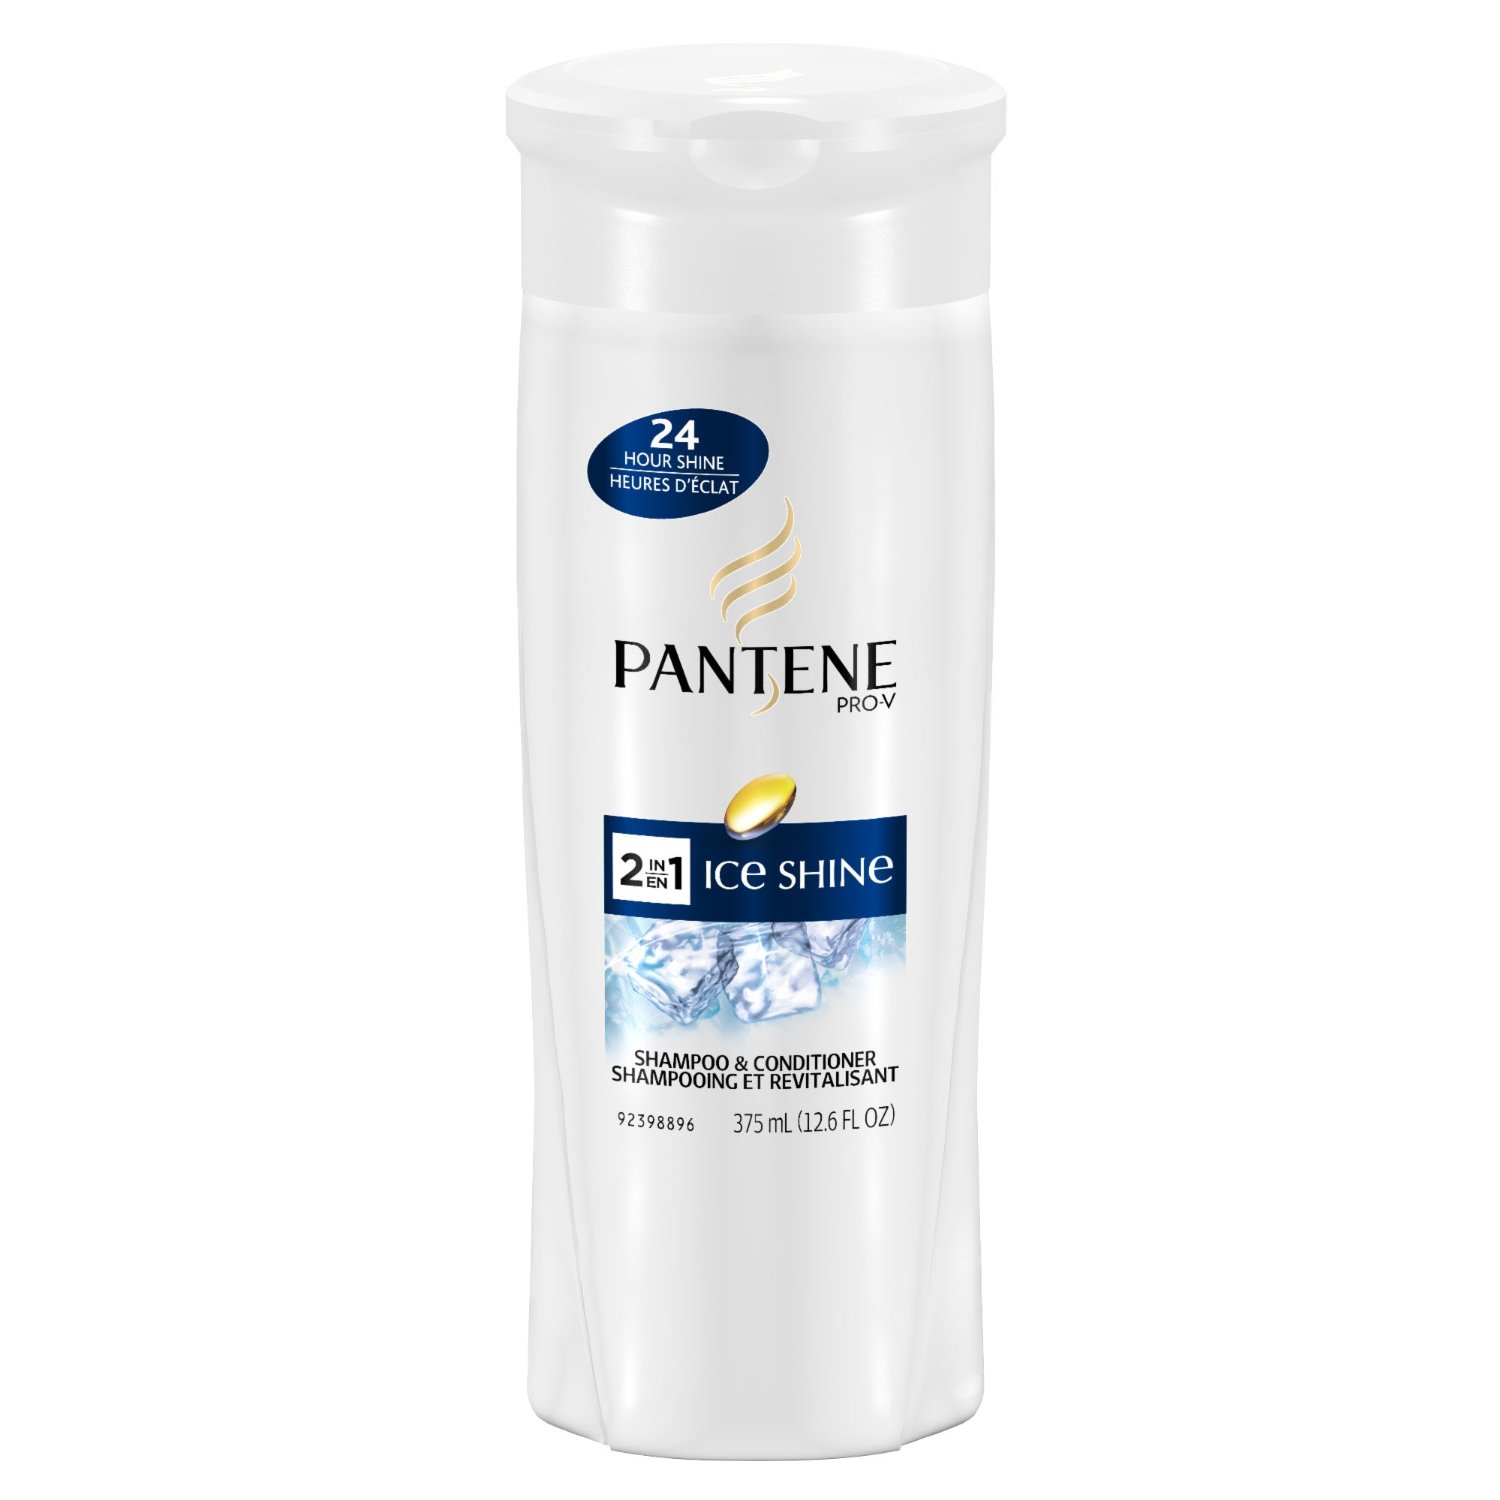 PANTENE Ice Shine 2-in-1 Shampoo and Conditioner, 12.6 Fluid Ounce (Pack of 2) $3.63